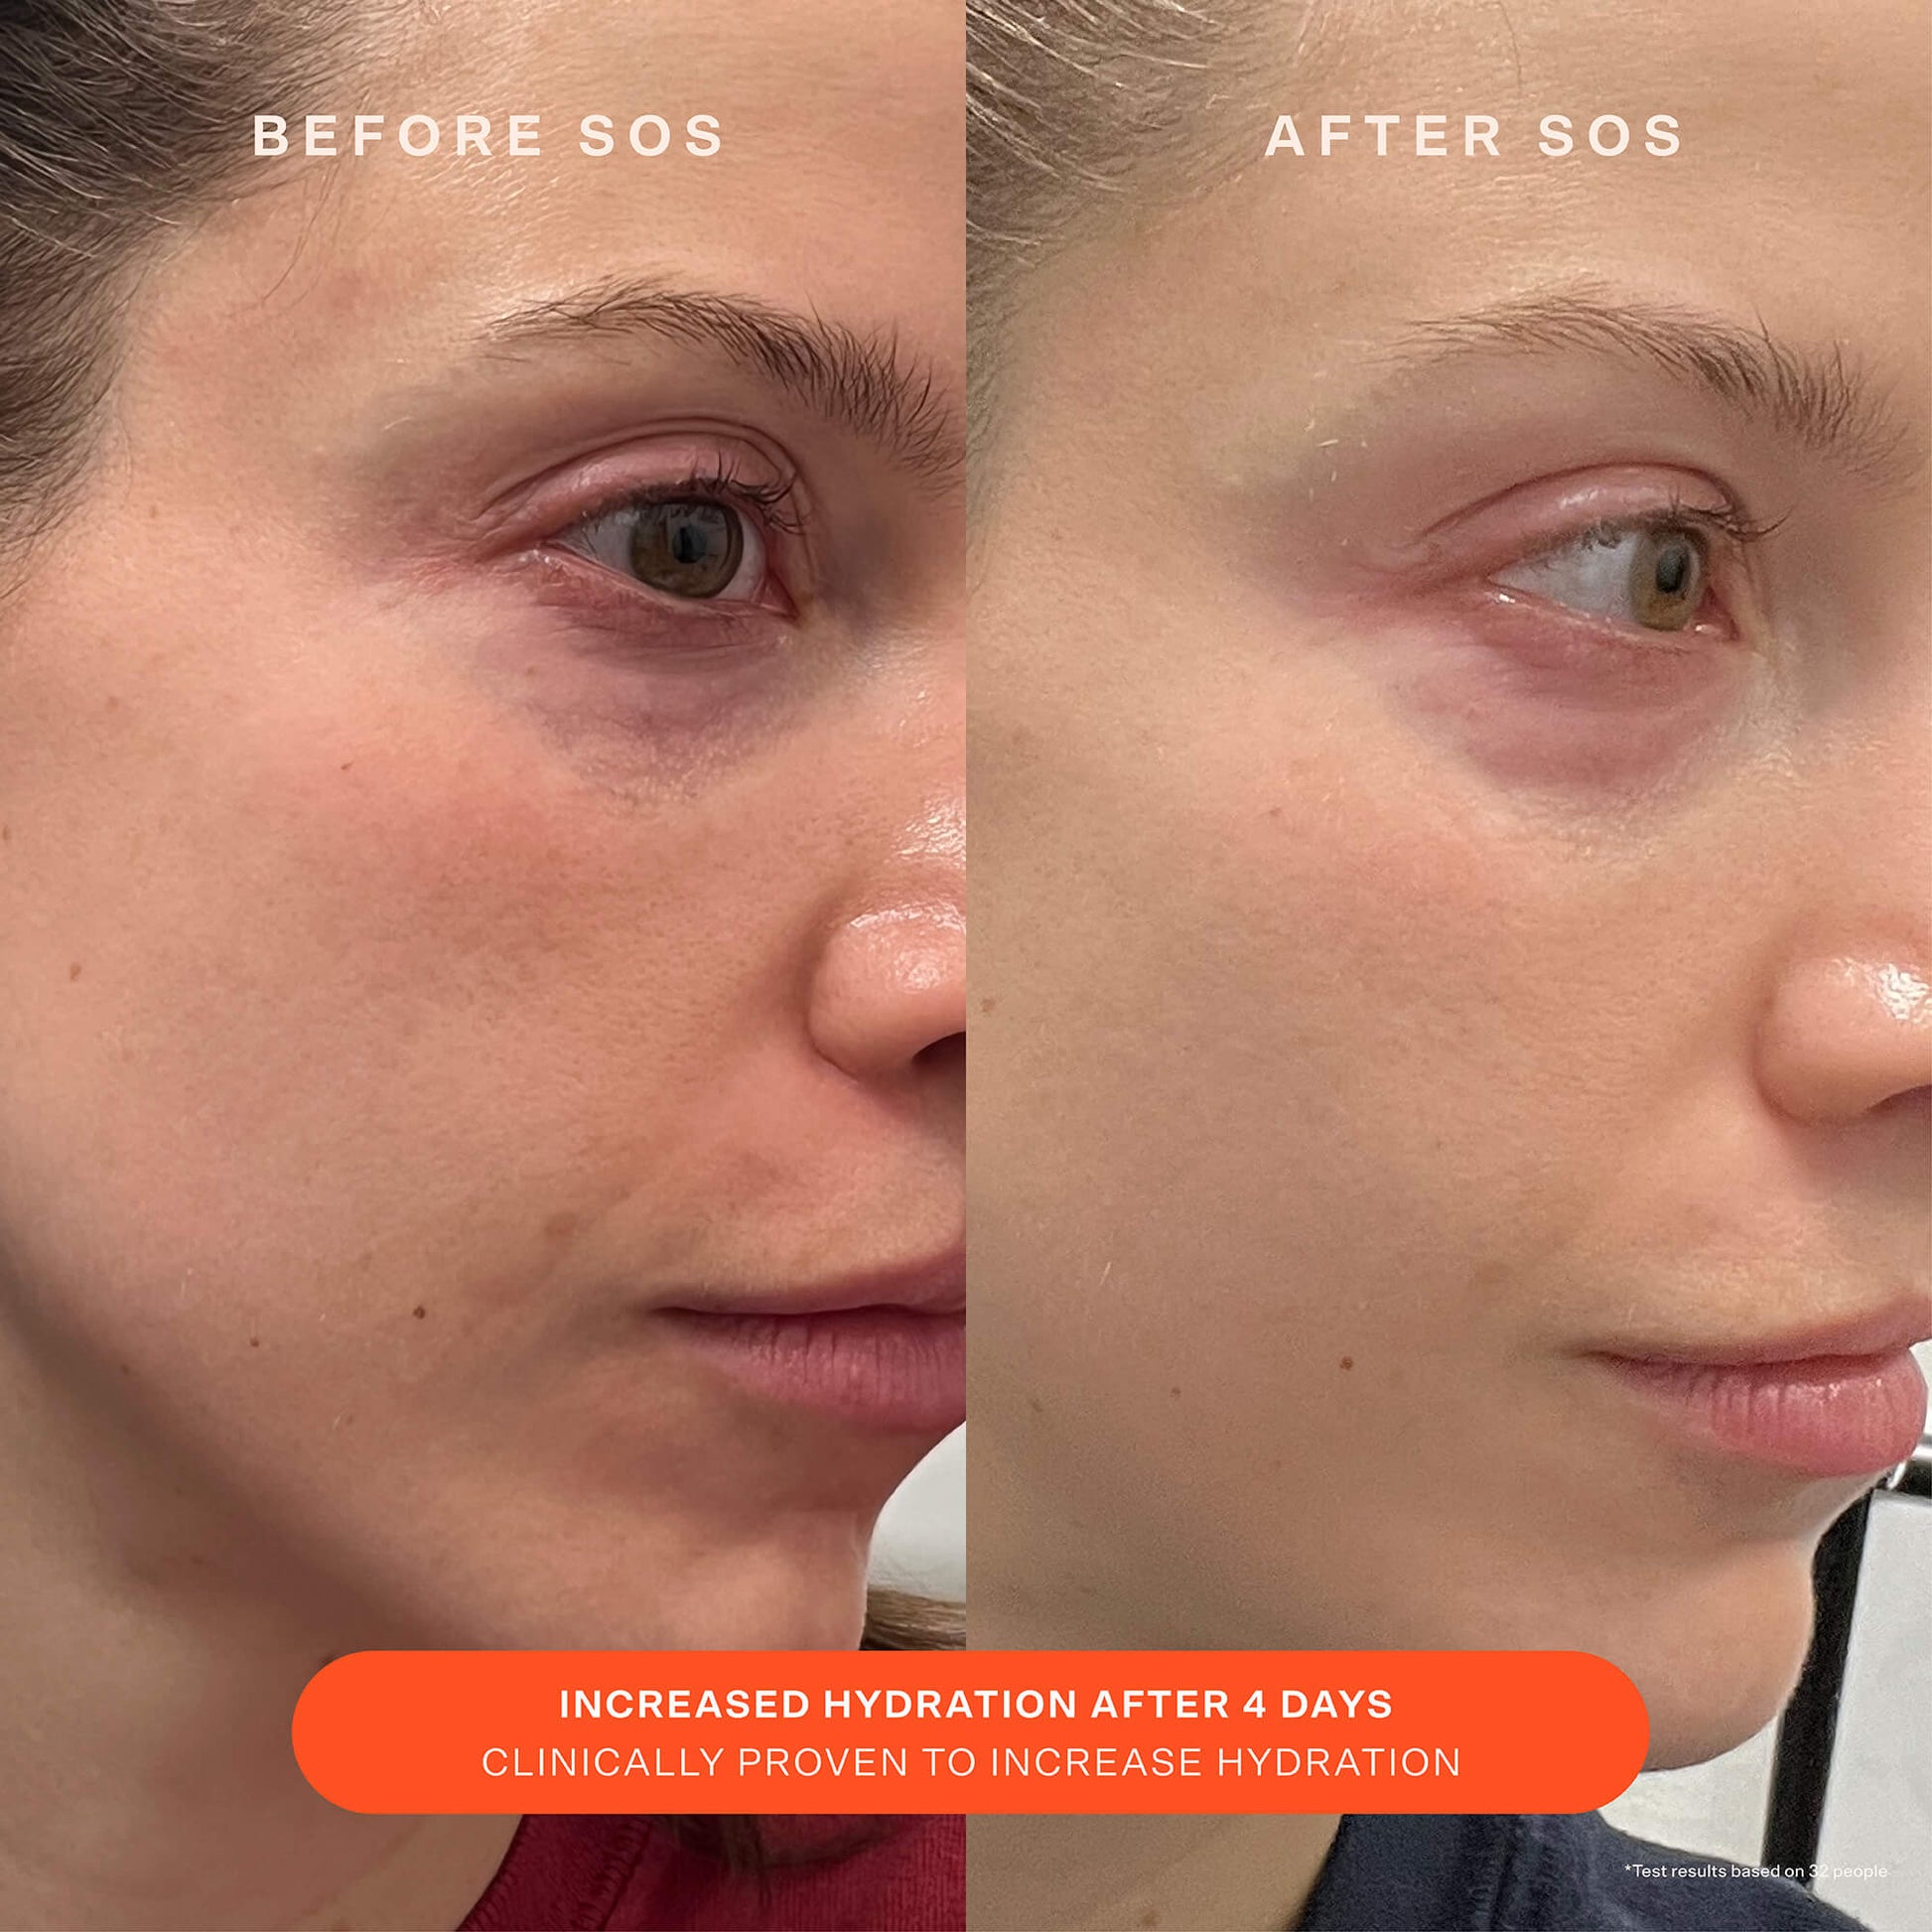 [Shared: A comparison before and after the use of Tower 28 Beauty SOS Recovery Cream. "Increased hydration after 4 days. Clinically proven to increase hydration."